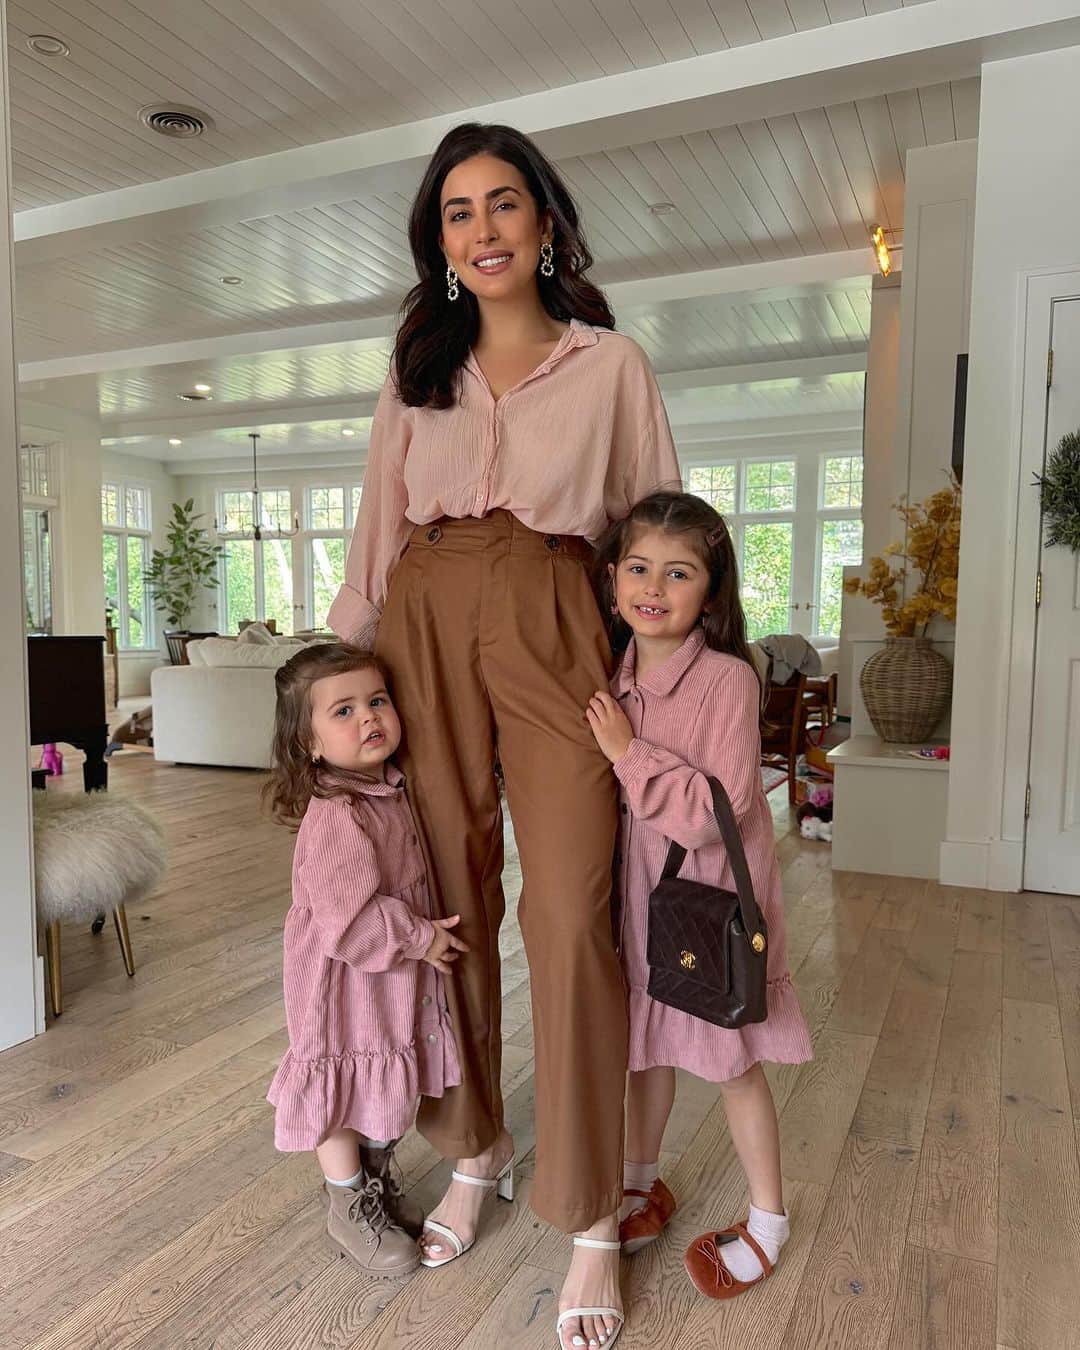 Sazan Hendrixのインスタグラム：「little moments in life lately 🩷🍂  1. Felt pretty in pink with my girlies on a little mommy daughter date Sunday 💘 2. Oliver had his first adjustment and started sleeping more peacefully through the night (not sure if it was related or not) but my undereye bags and brain fog are forever grateful ☺️  3. Mom came to town and made my favorite: KIFTA! They’re delicious dough ball dumplings filled with minced beef / herbs in a tomato soup w/ veggies 🤩 4. Purged my closet this week and made room for all my cozy fall sets (linked in my “outfits” highlight folder)  5. A page from my book about disconnecting 📖  6. Silly moments with my besties 7.  Cutest baby shower blooms inspiring me for holiday gatherings  8. A day date with Stevie is what my soul didn’t know it needed this past week 😌 9. Taco Bell date with Teens after school pick up (it was her first time and mine in a loooong time yummm)  10. I’m fun now 😆  What have you been up to lately!? 💘 #loveyoufam #lifelately」